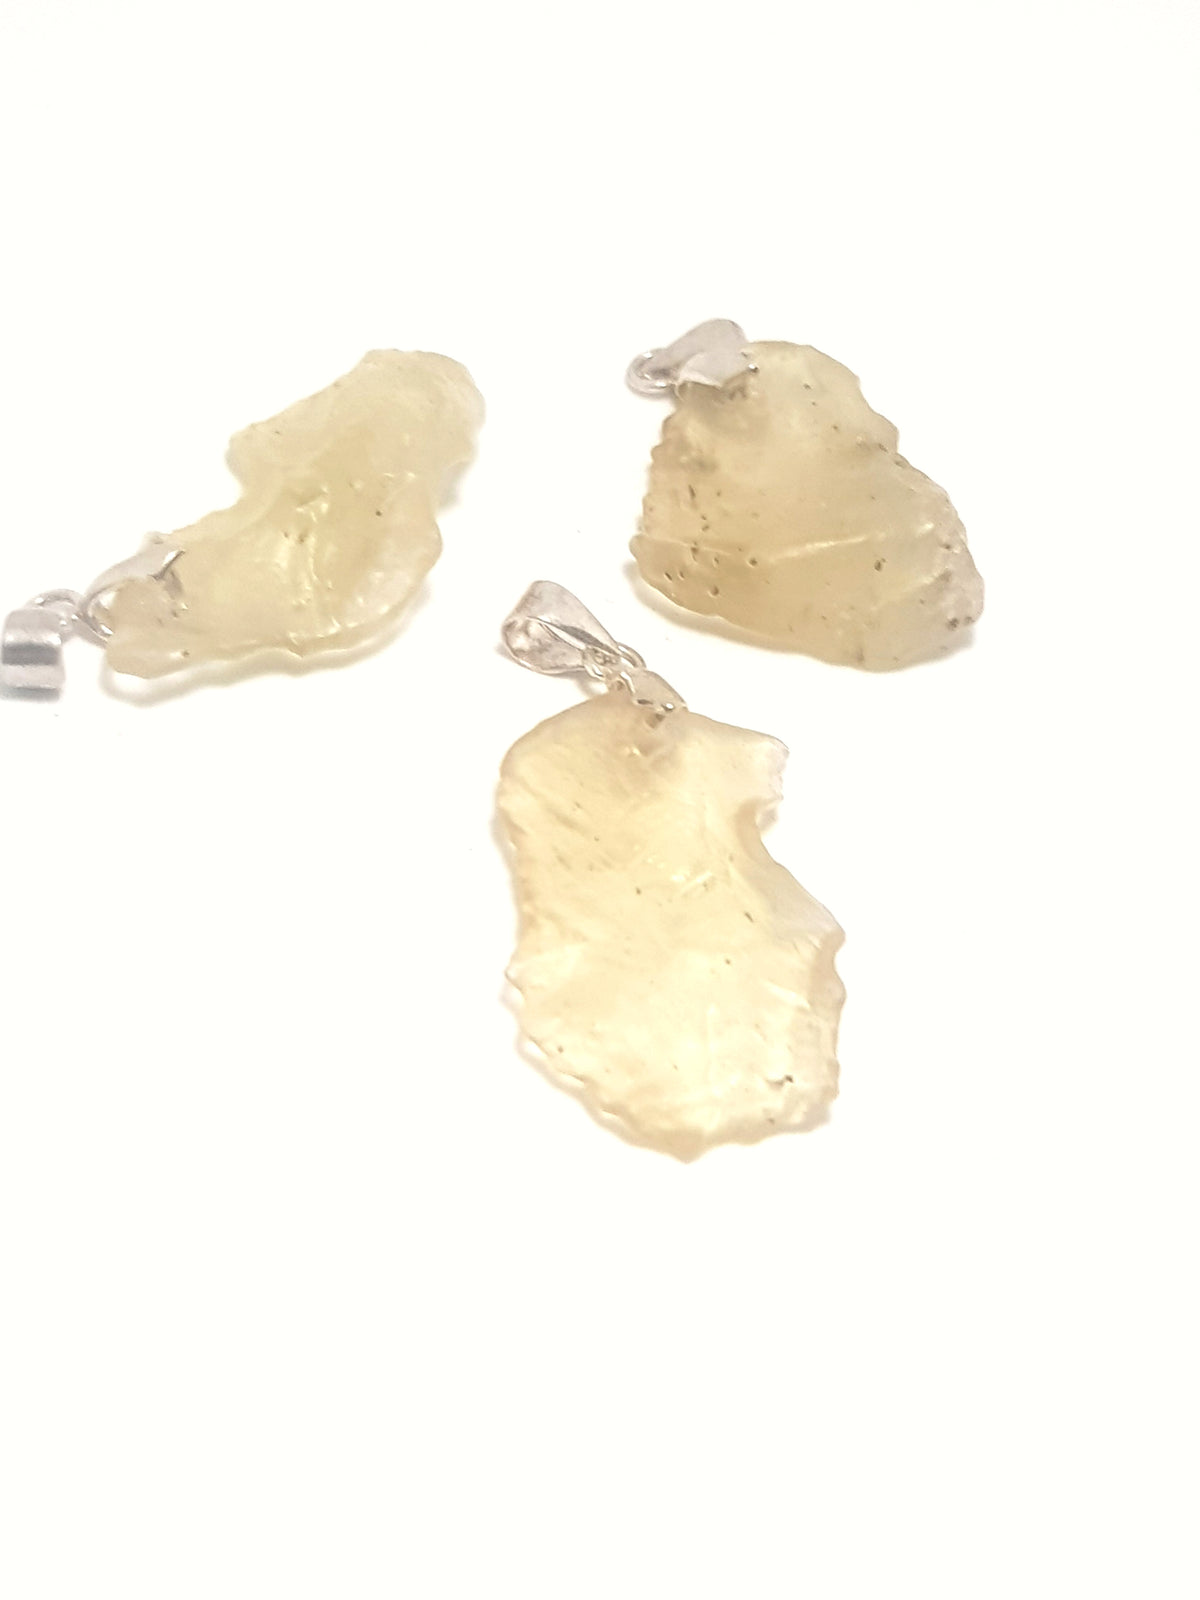 three pieces of libyan desert glass. They have a metal pennant attached on  one end, they are pendants